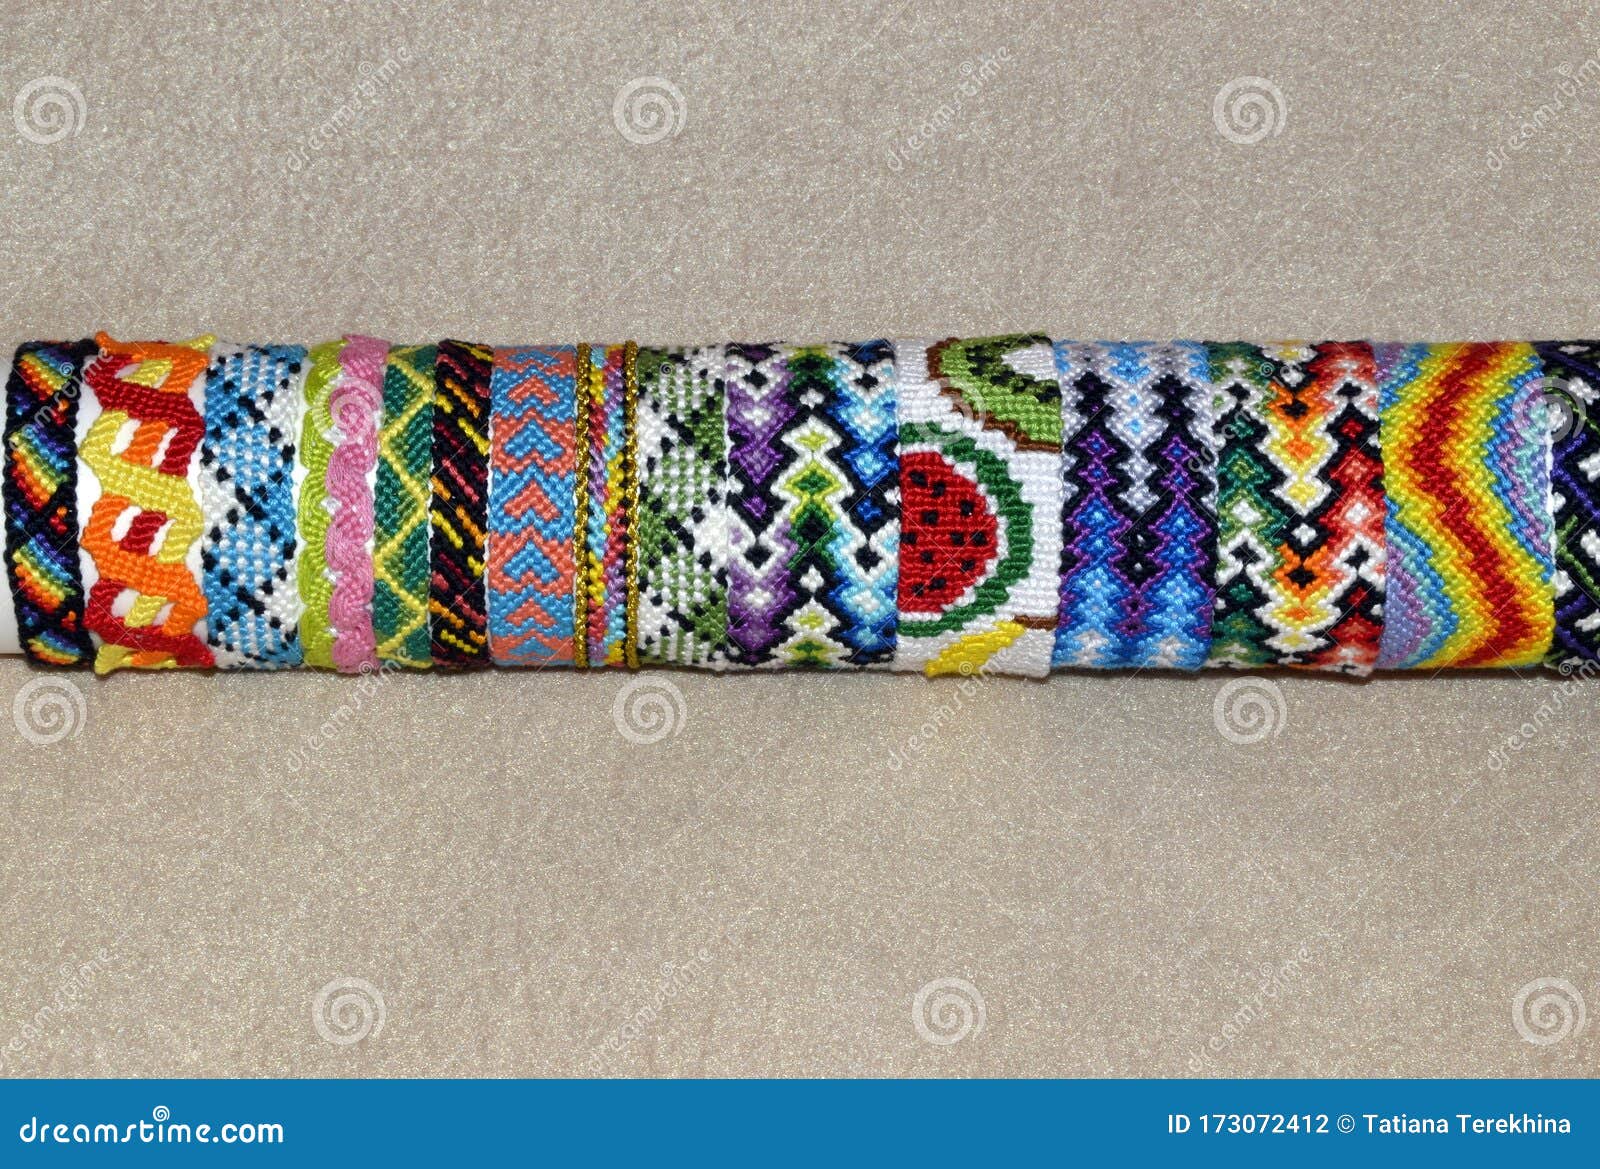 Tied Diy Friendship Bracelets With Indian Colorful Pattern Handmade Of  Thread On White Background Stock Photo - Download Image Now - iStock